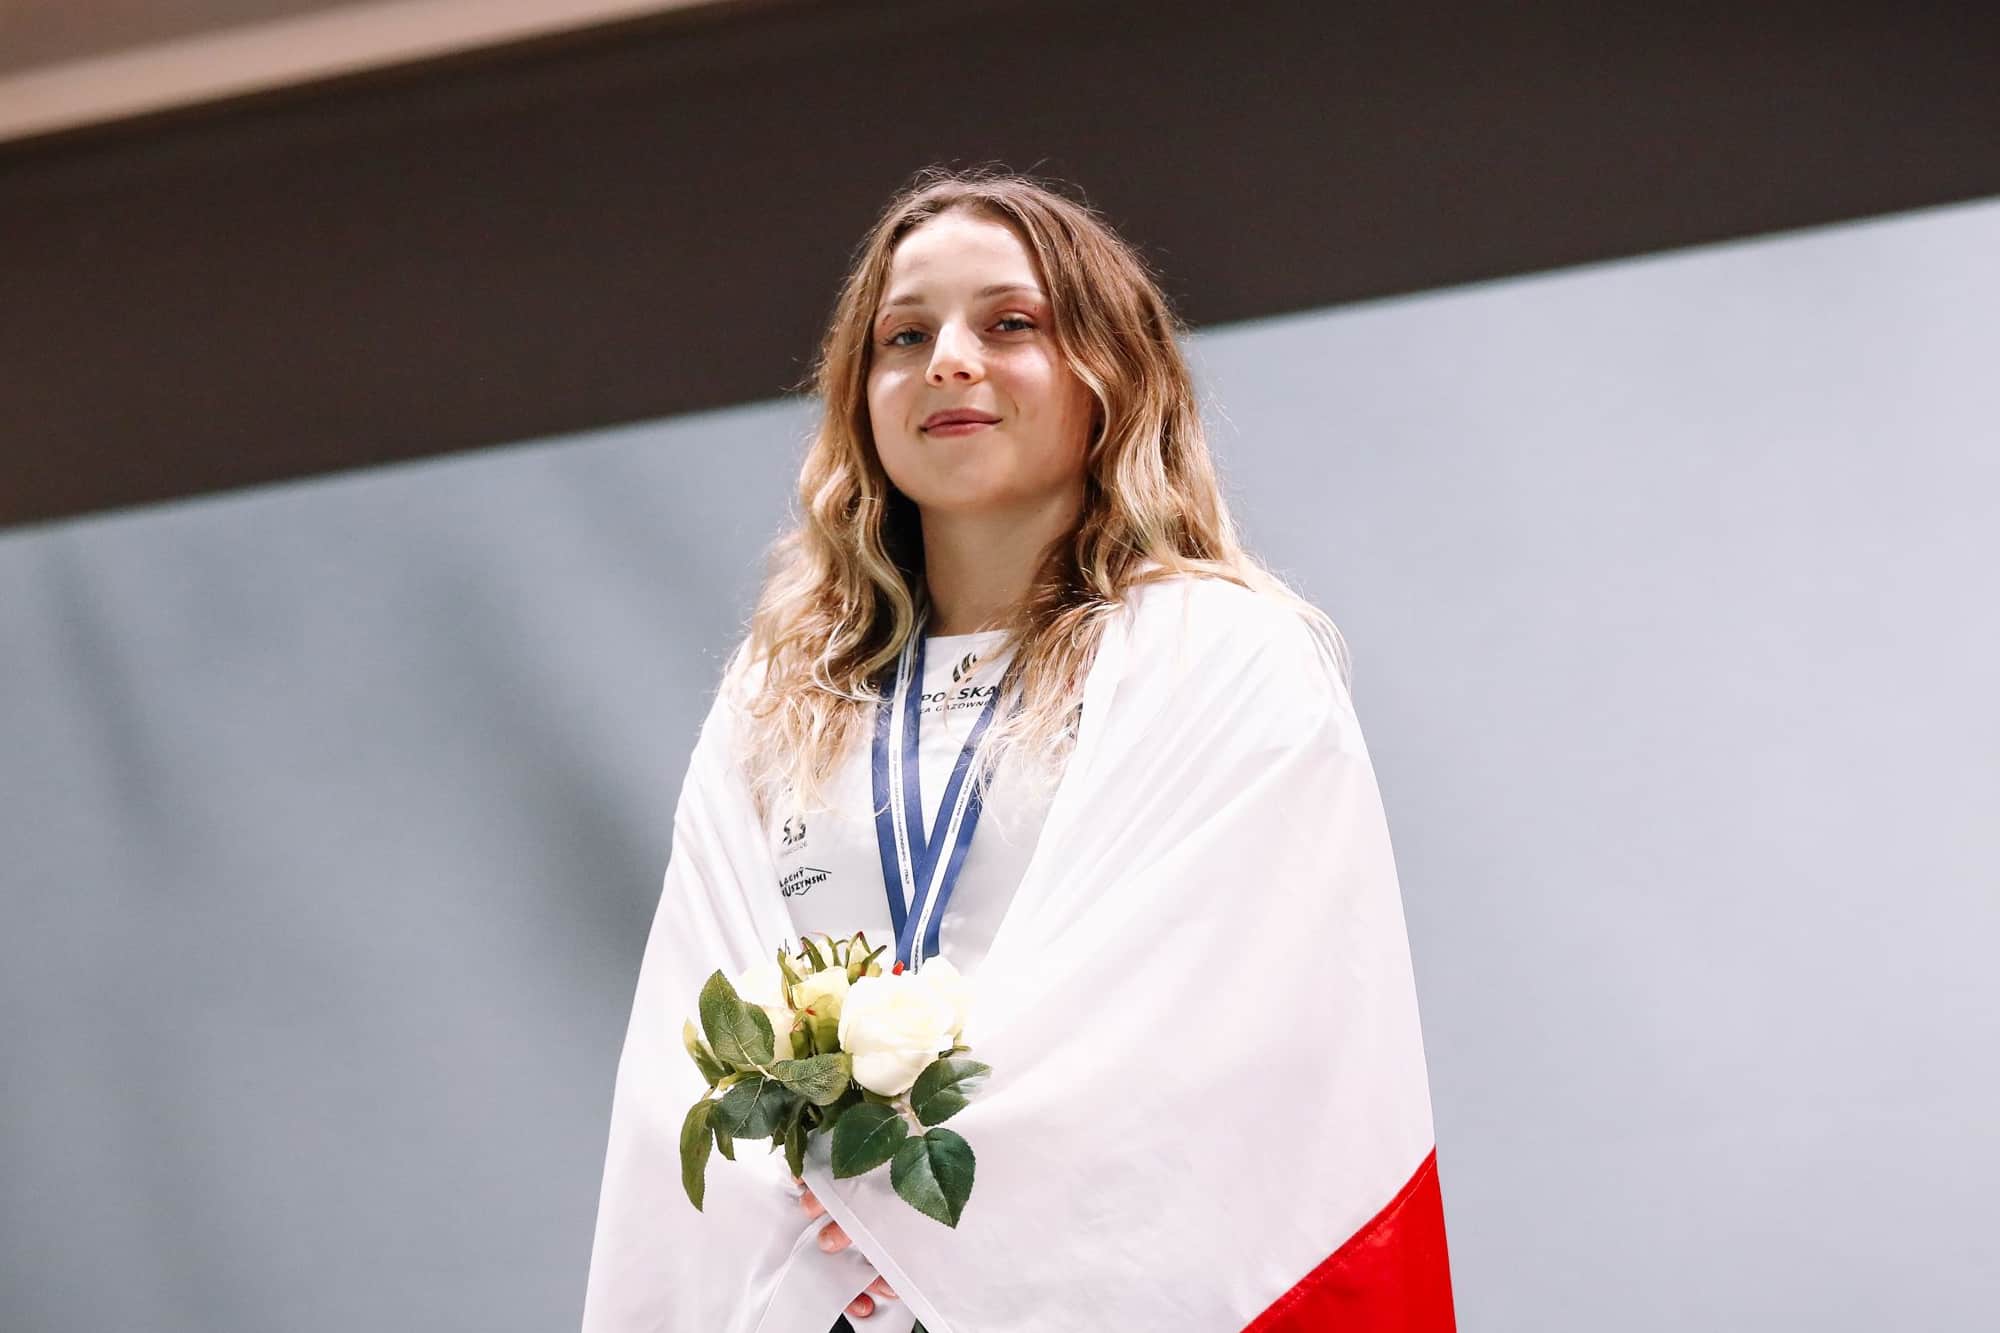 Magdalena Czaban Becomes Three-Time European Champion on Final Day of European Championships